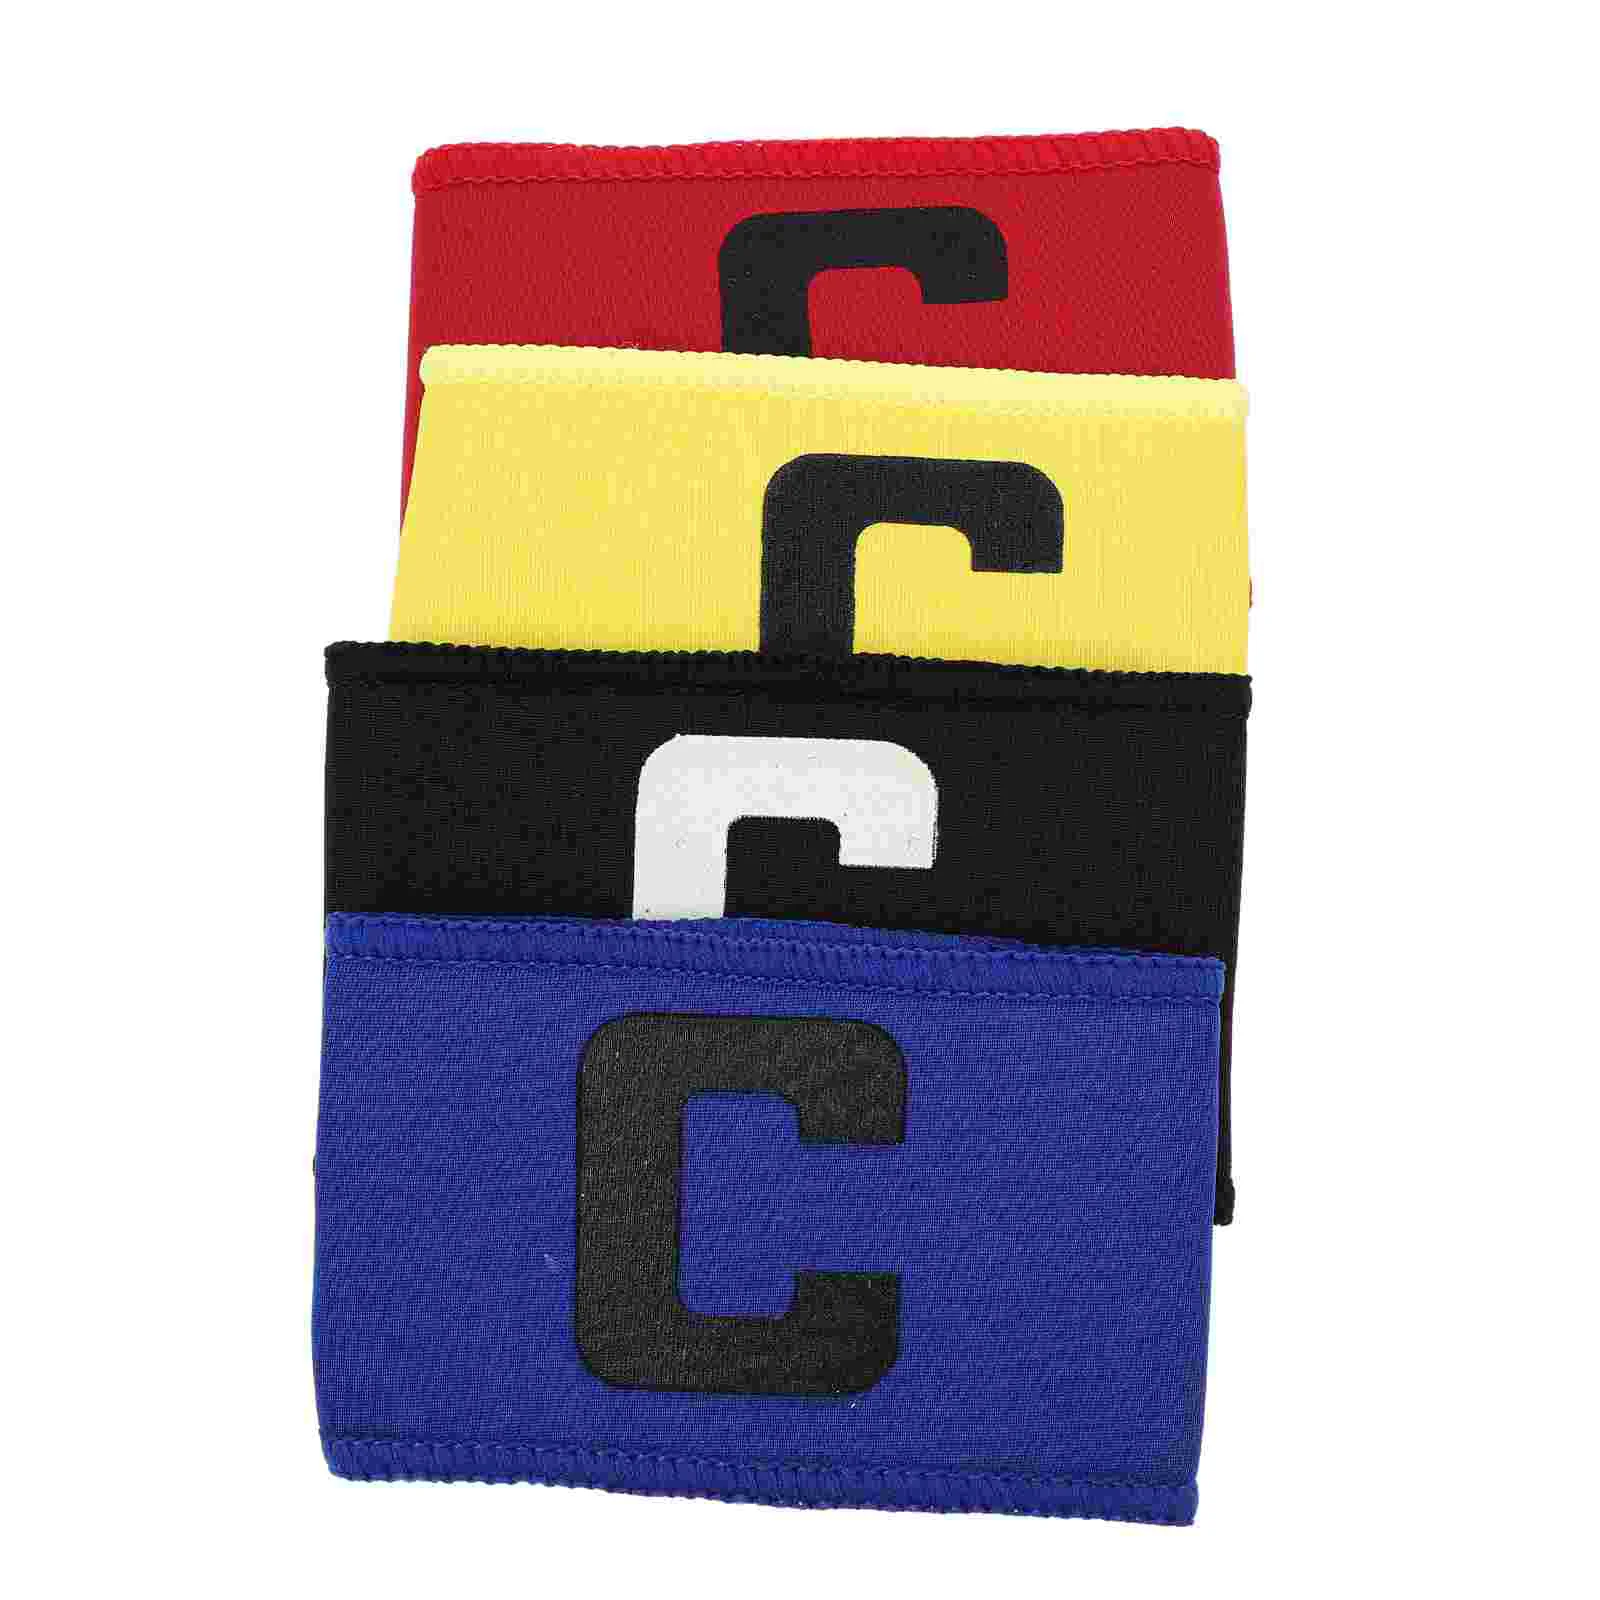 

Sports Accessories Captain Armband Sports Arm Bands Elastic Captain's Armbands for Football